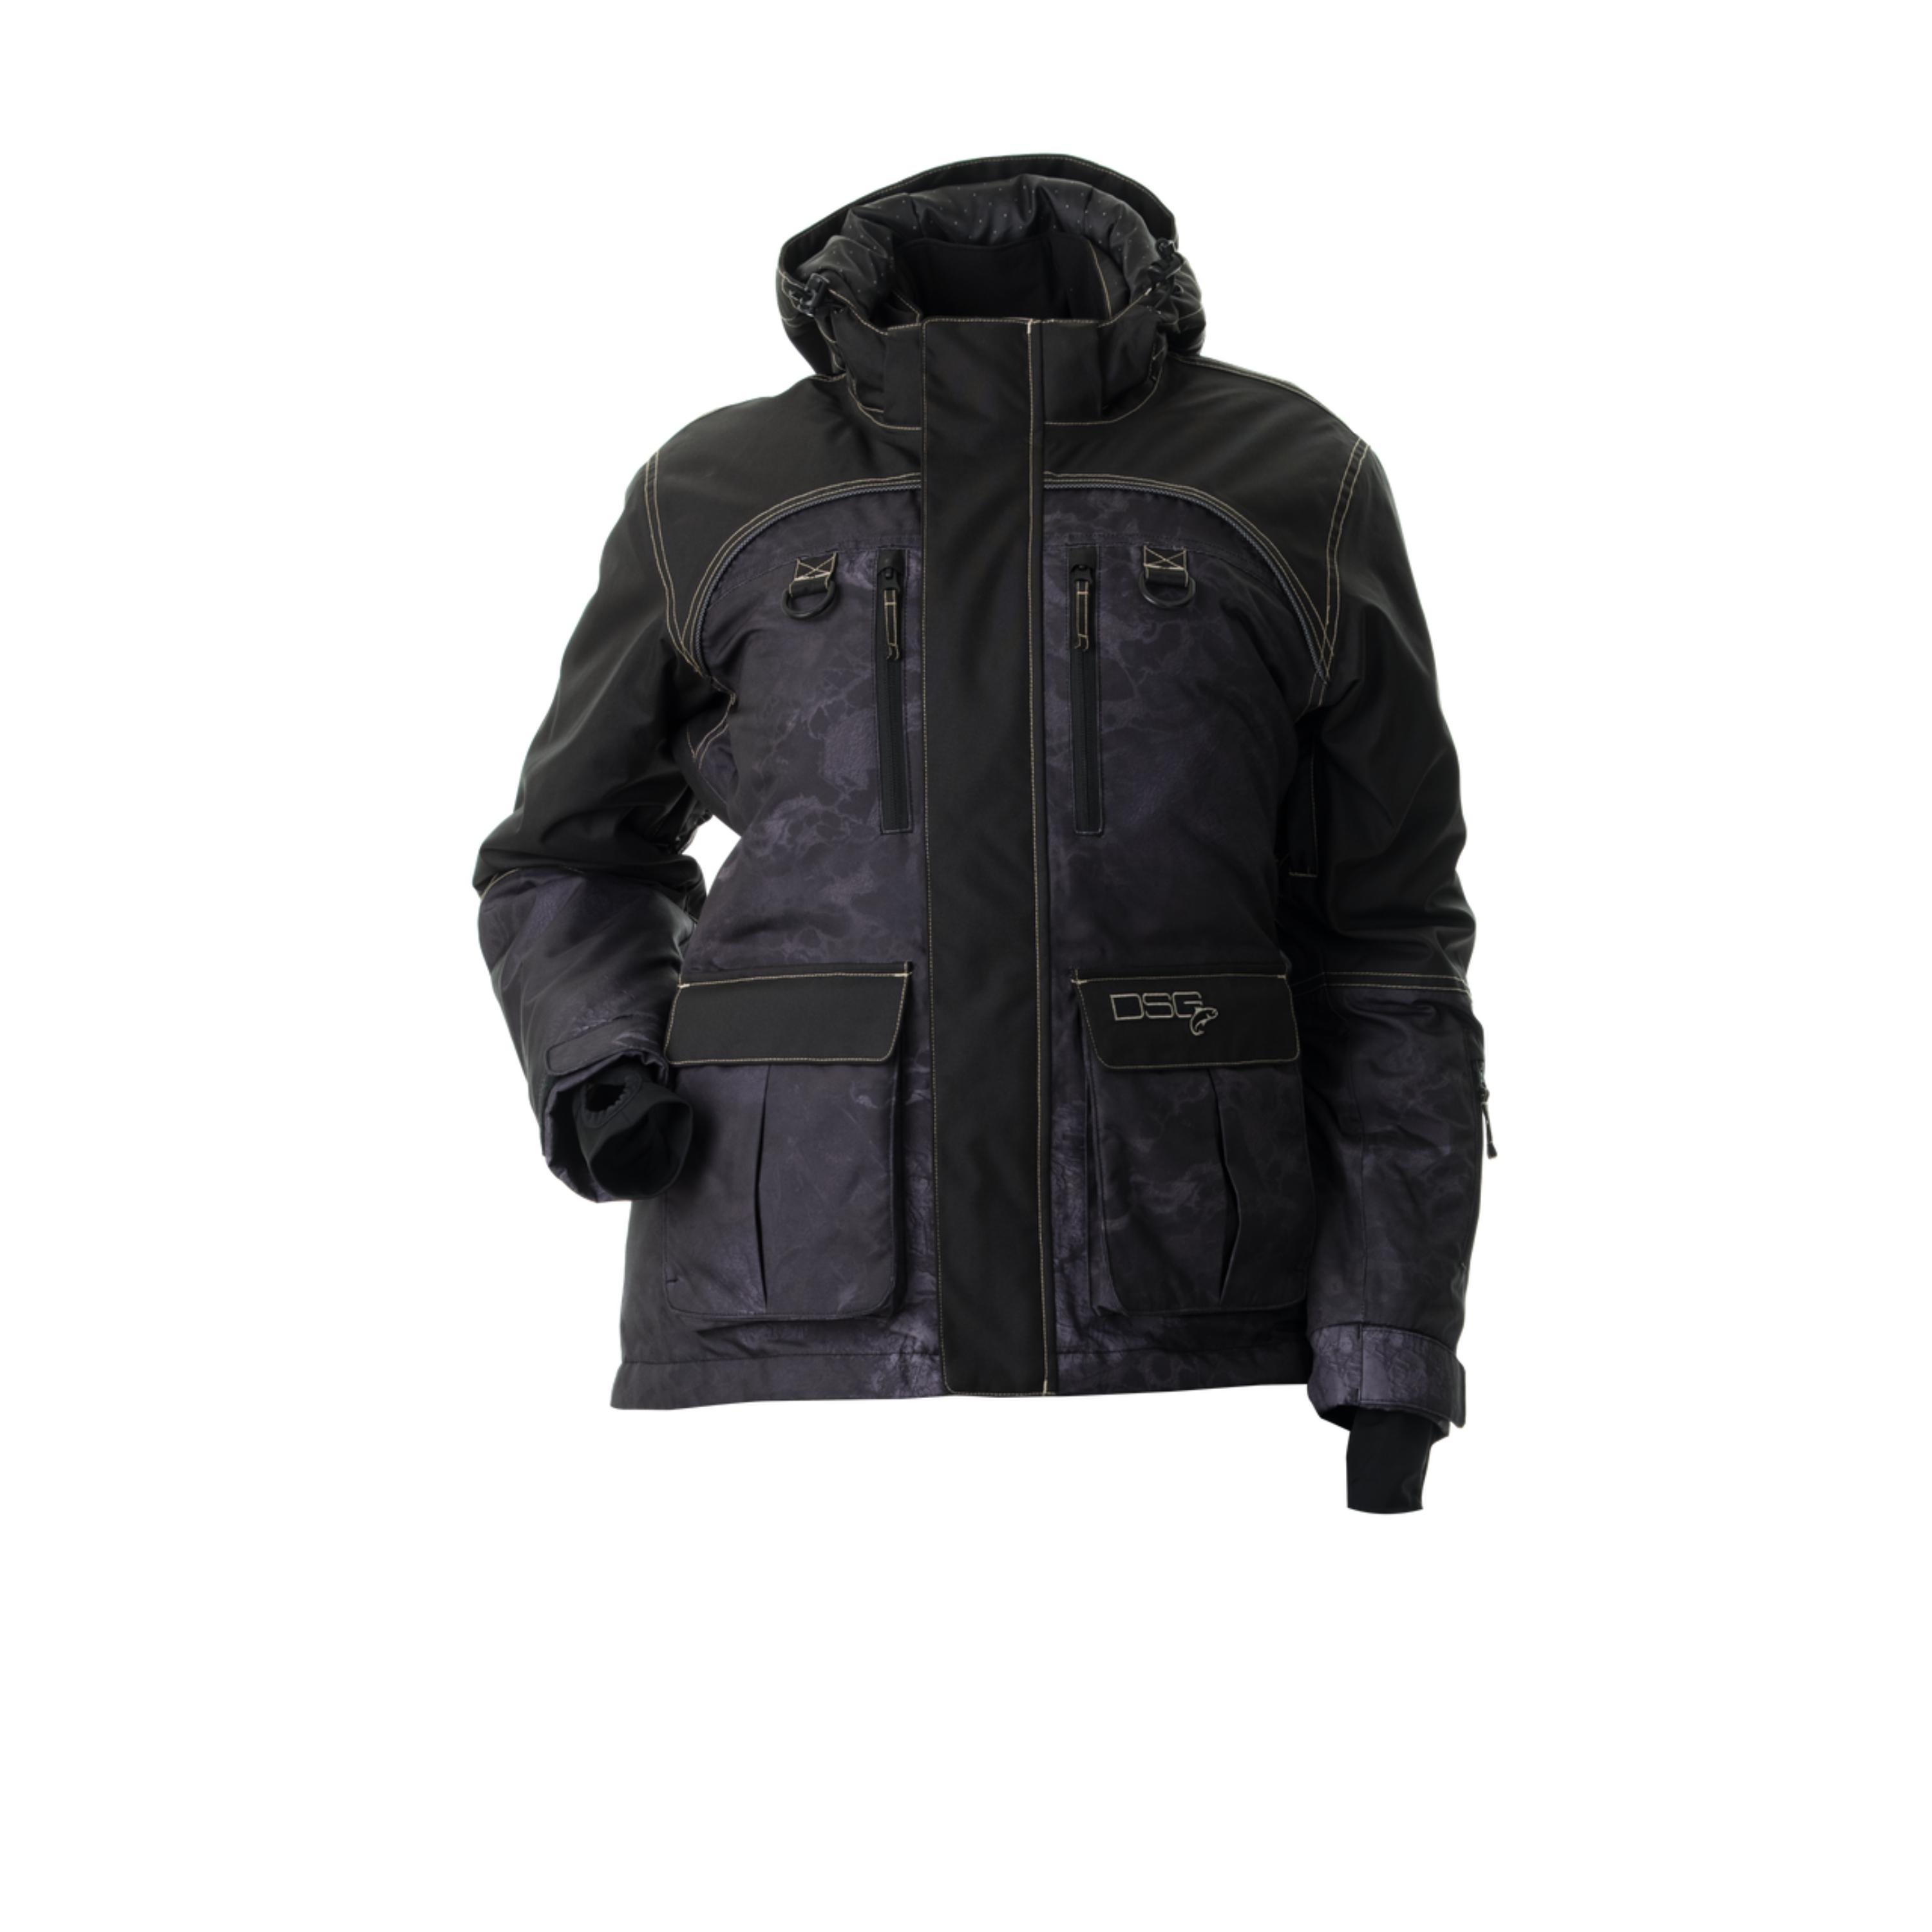 Stay Warm and Stylish with Arctic Appeal Ice Fishing Jacket and Drop Seat  Bibs